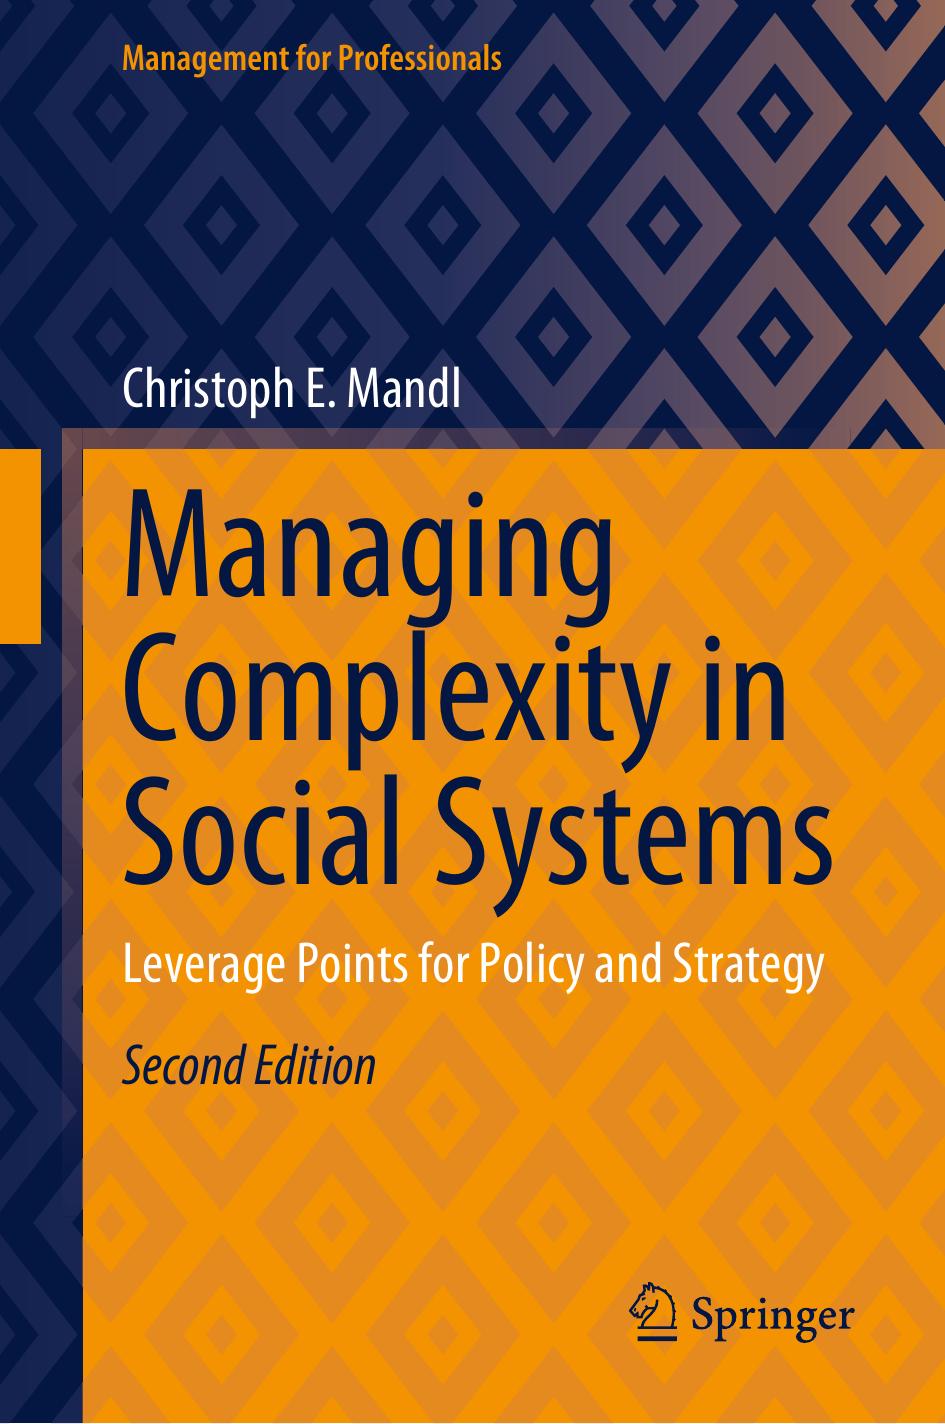 Managing Complexity in Social Systems by Christoph E. Mandl